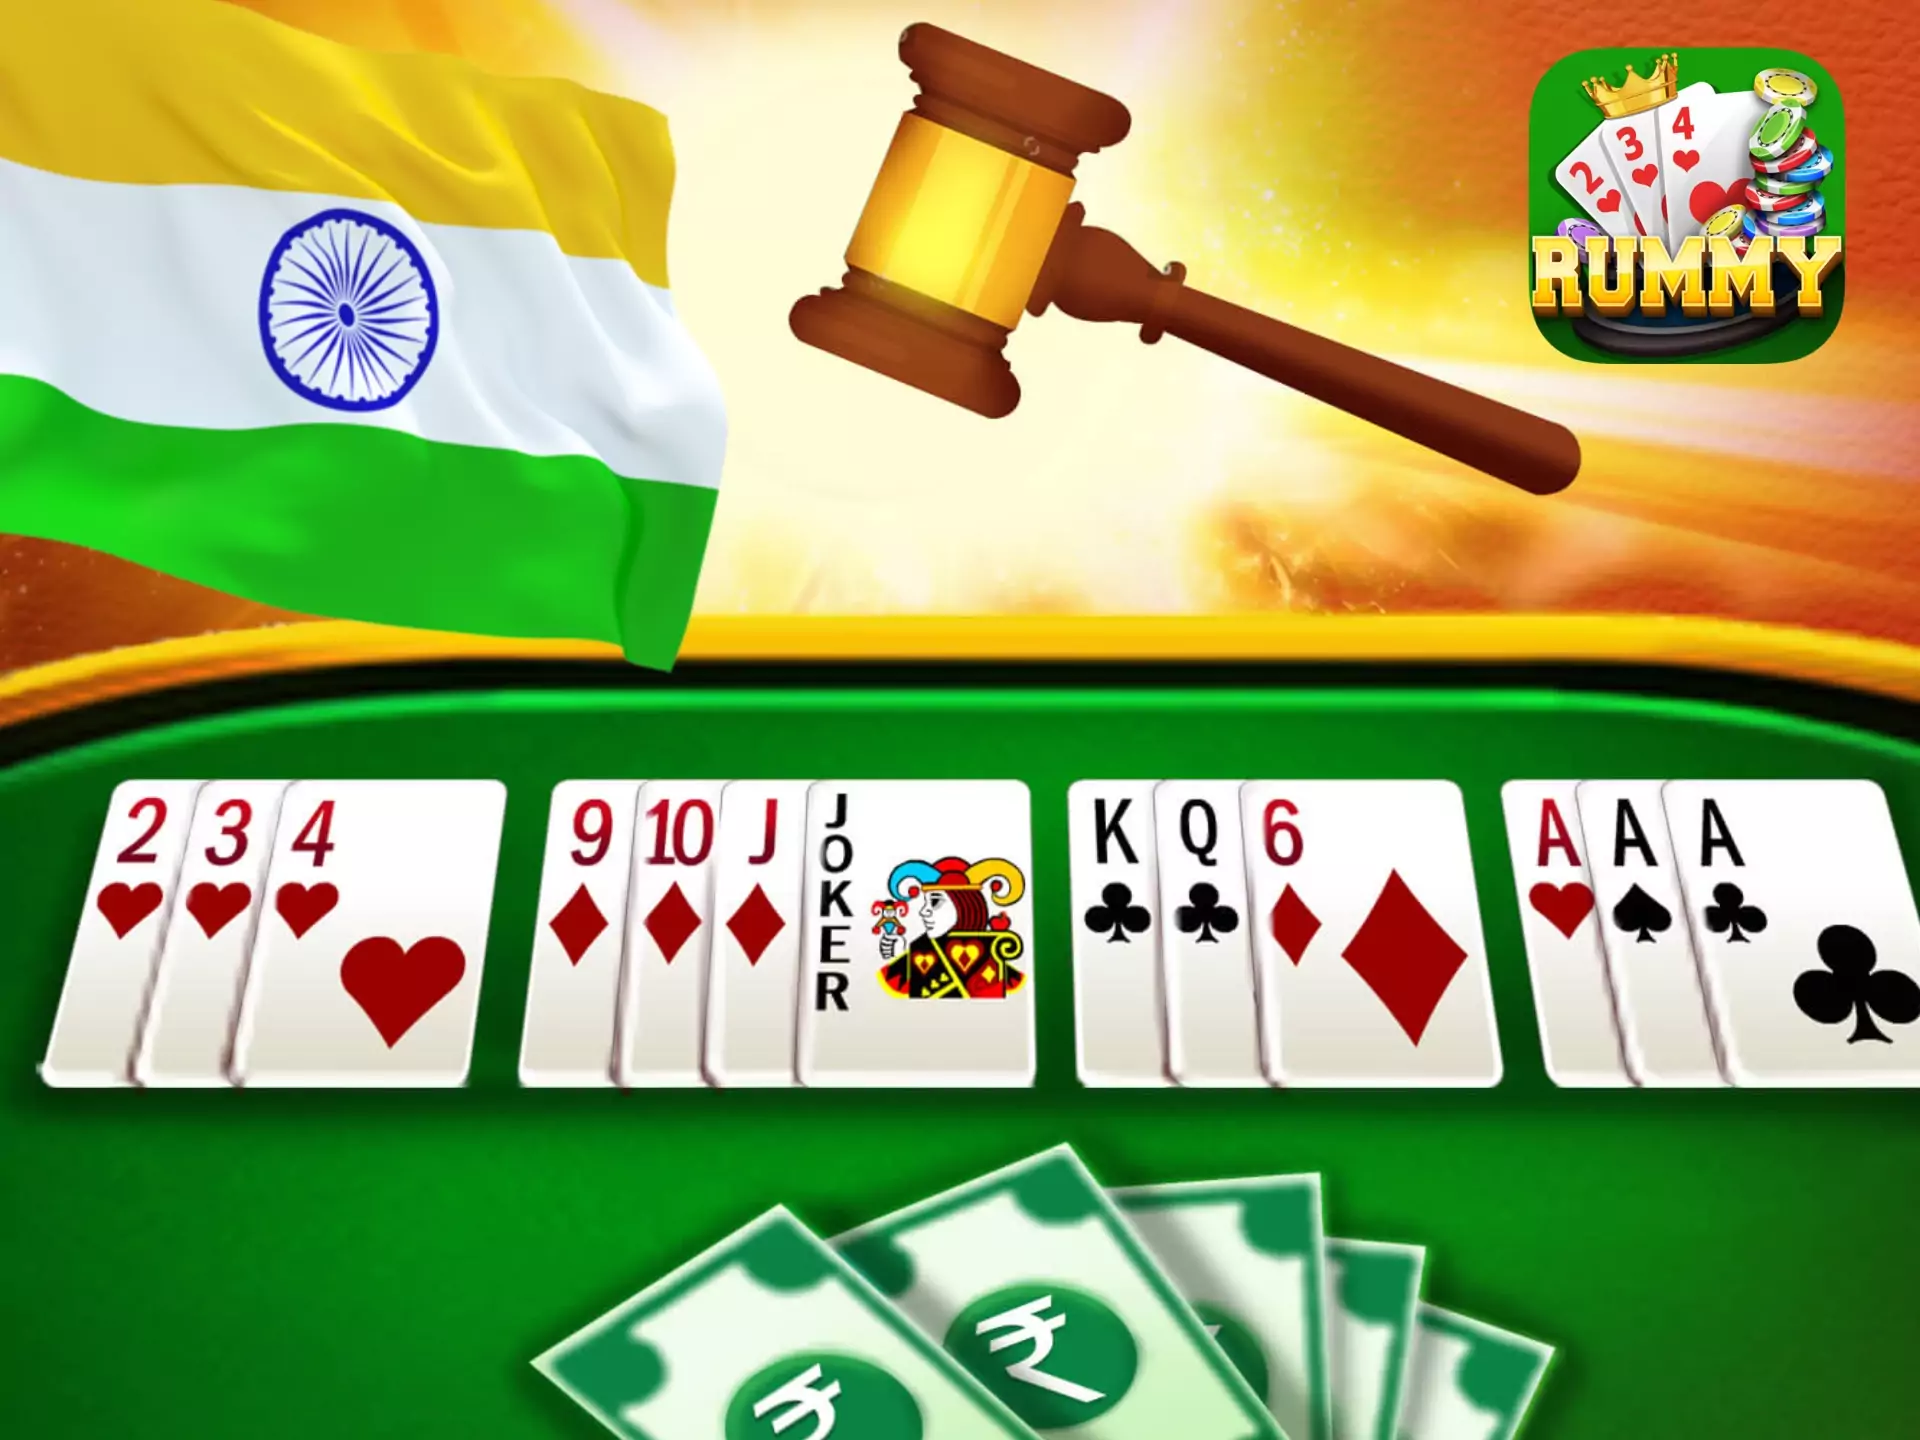 Online rummy is absoluteley legal in Indian casinos.